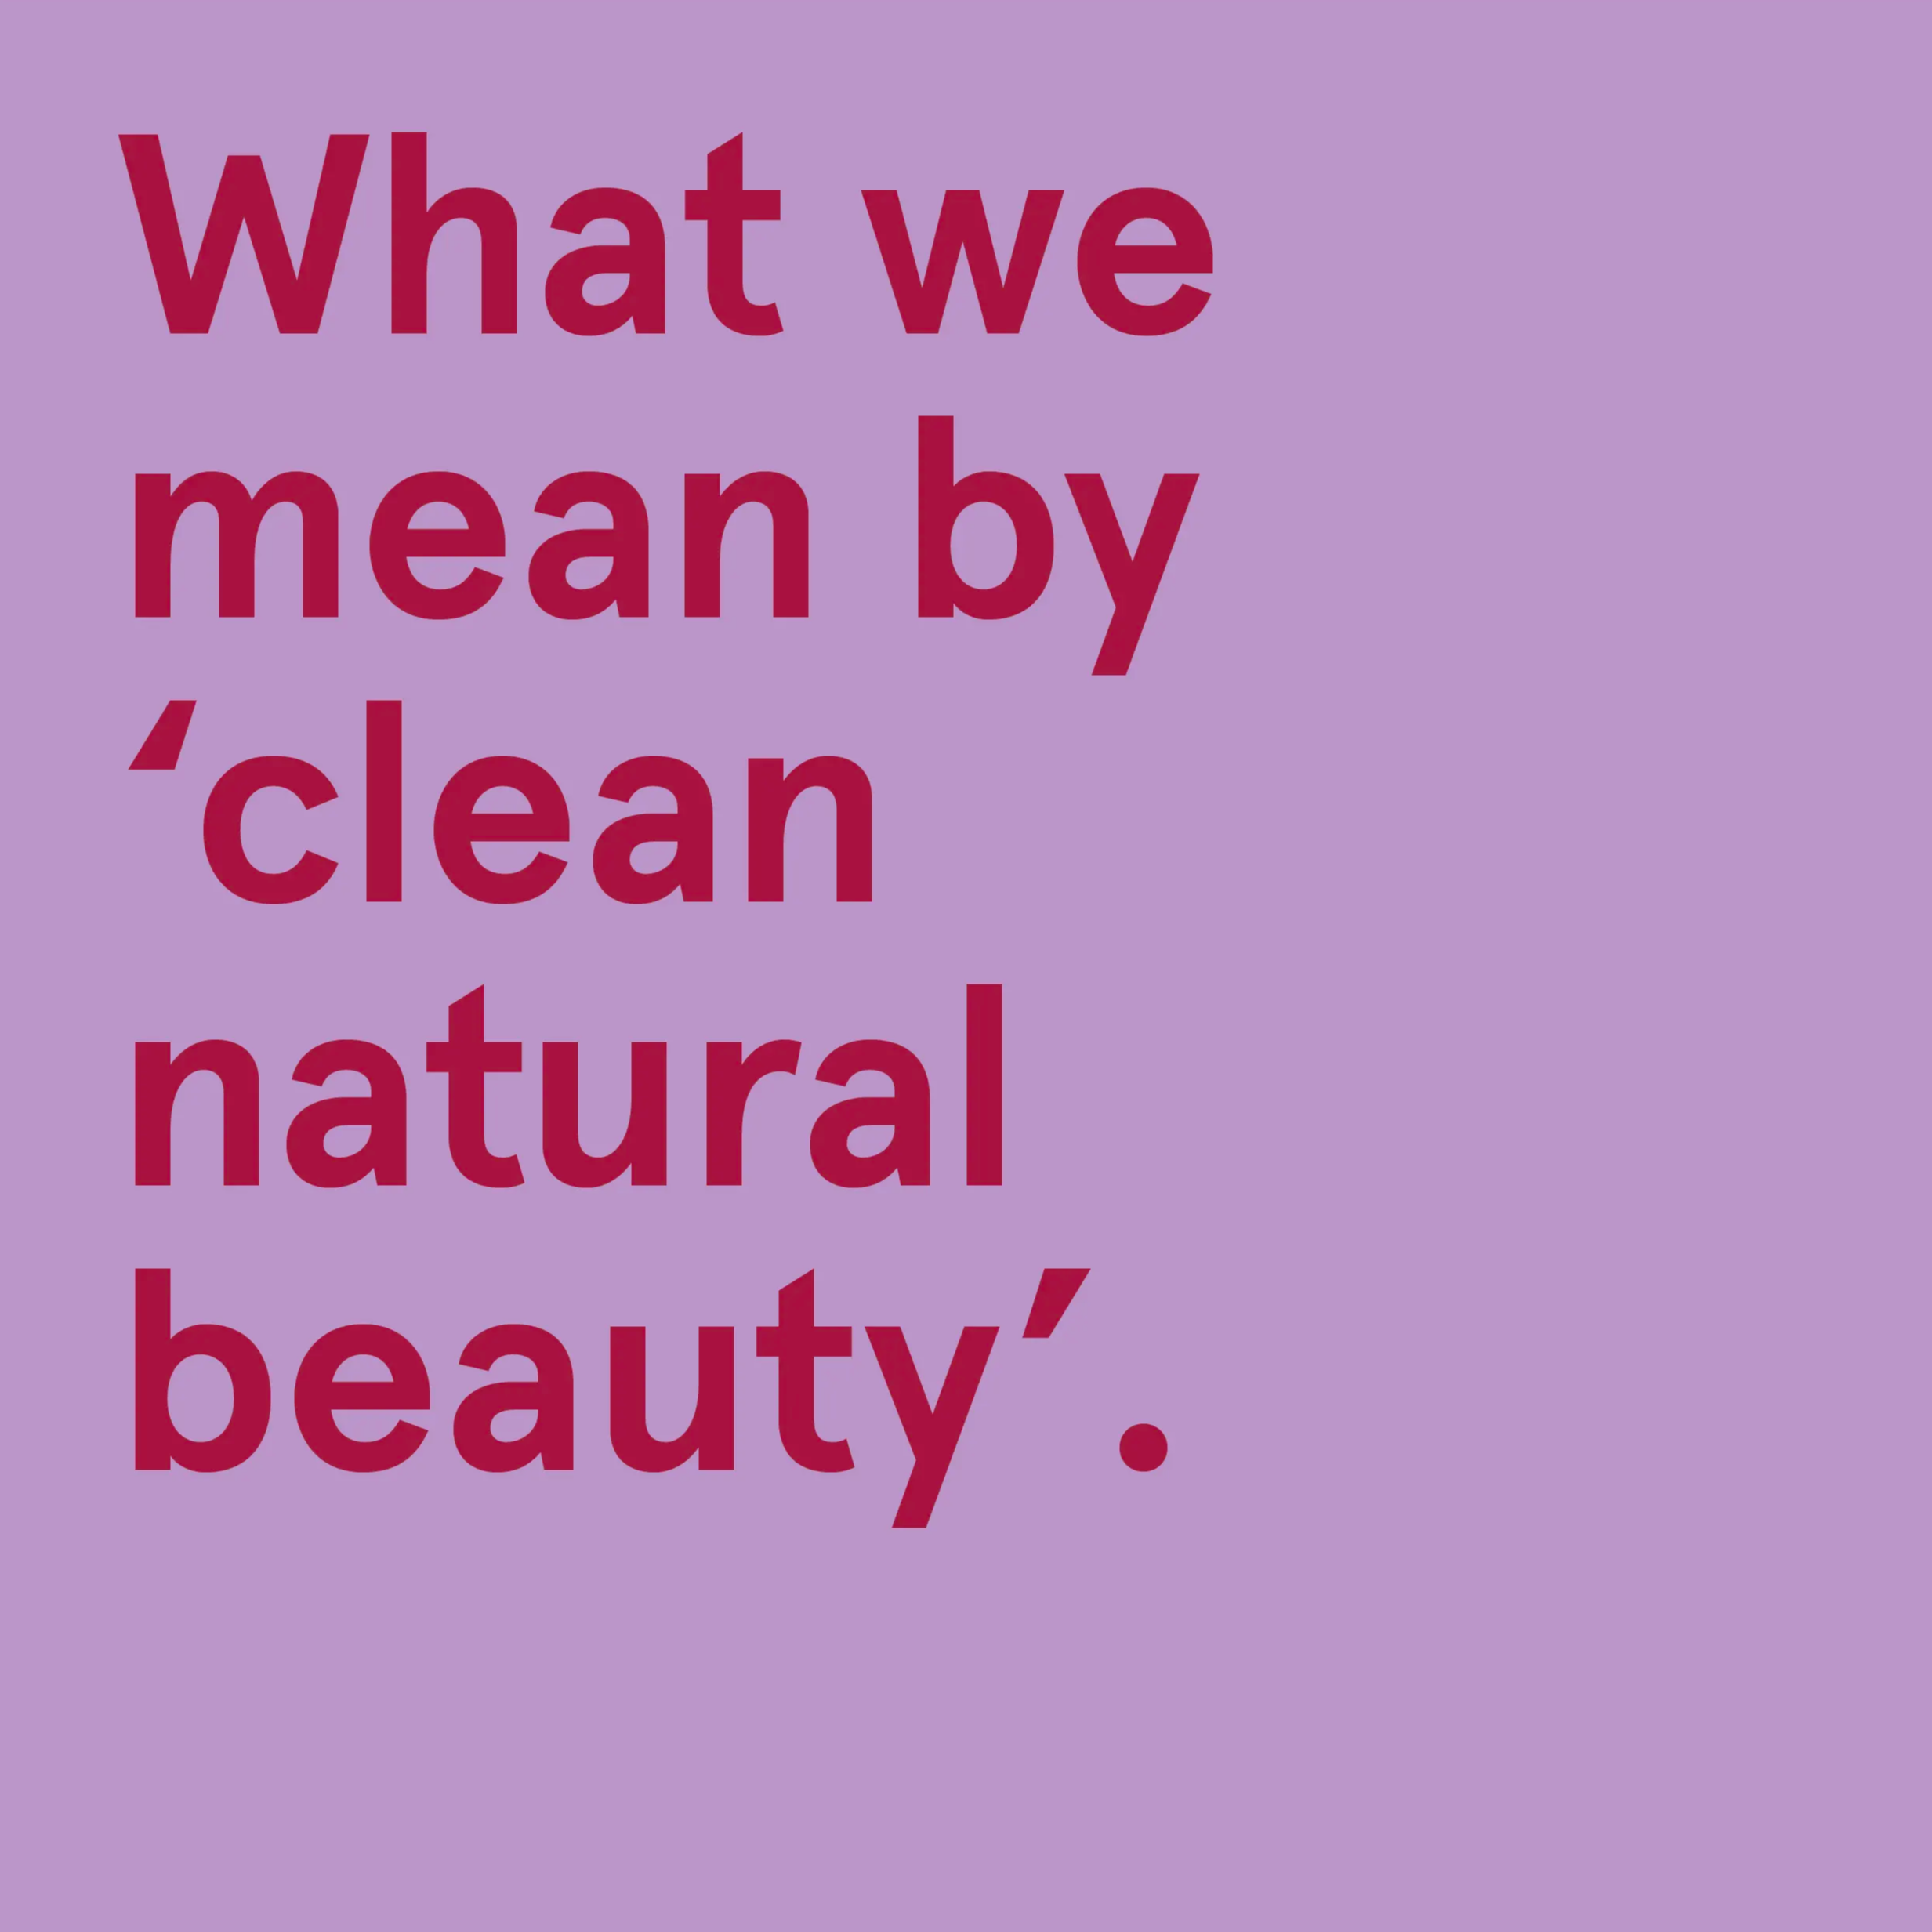 What We Mean by 'Clean Natural Beauty'.